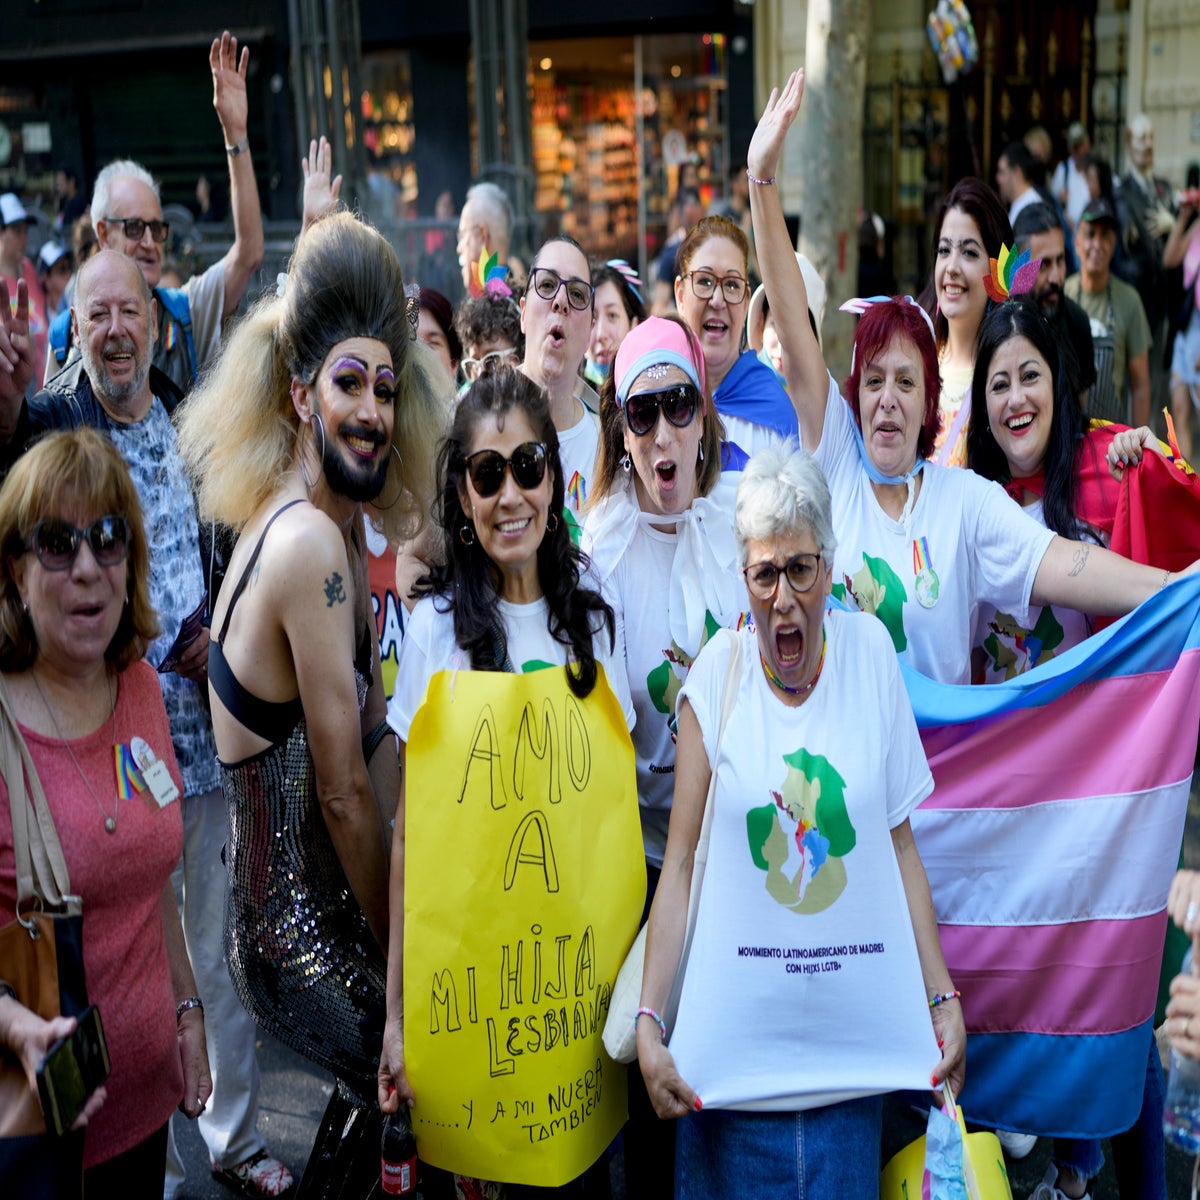 Mothers of LGBTQ children join forces in Latin America